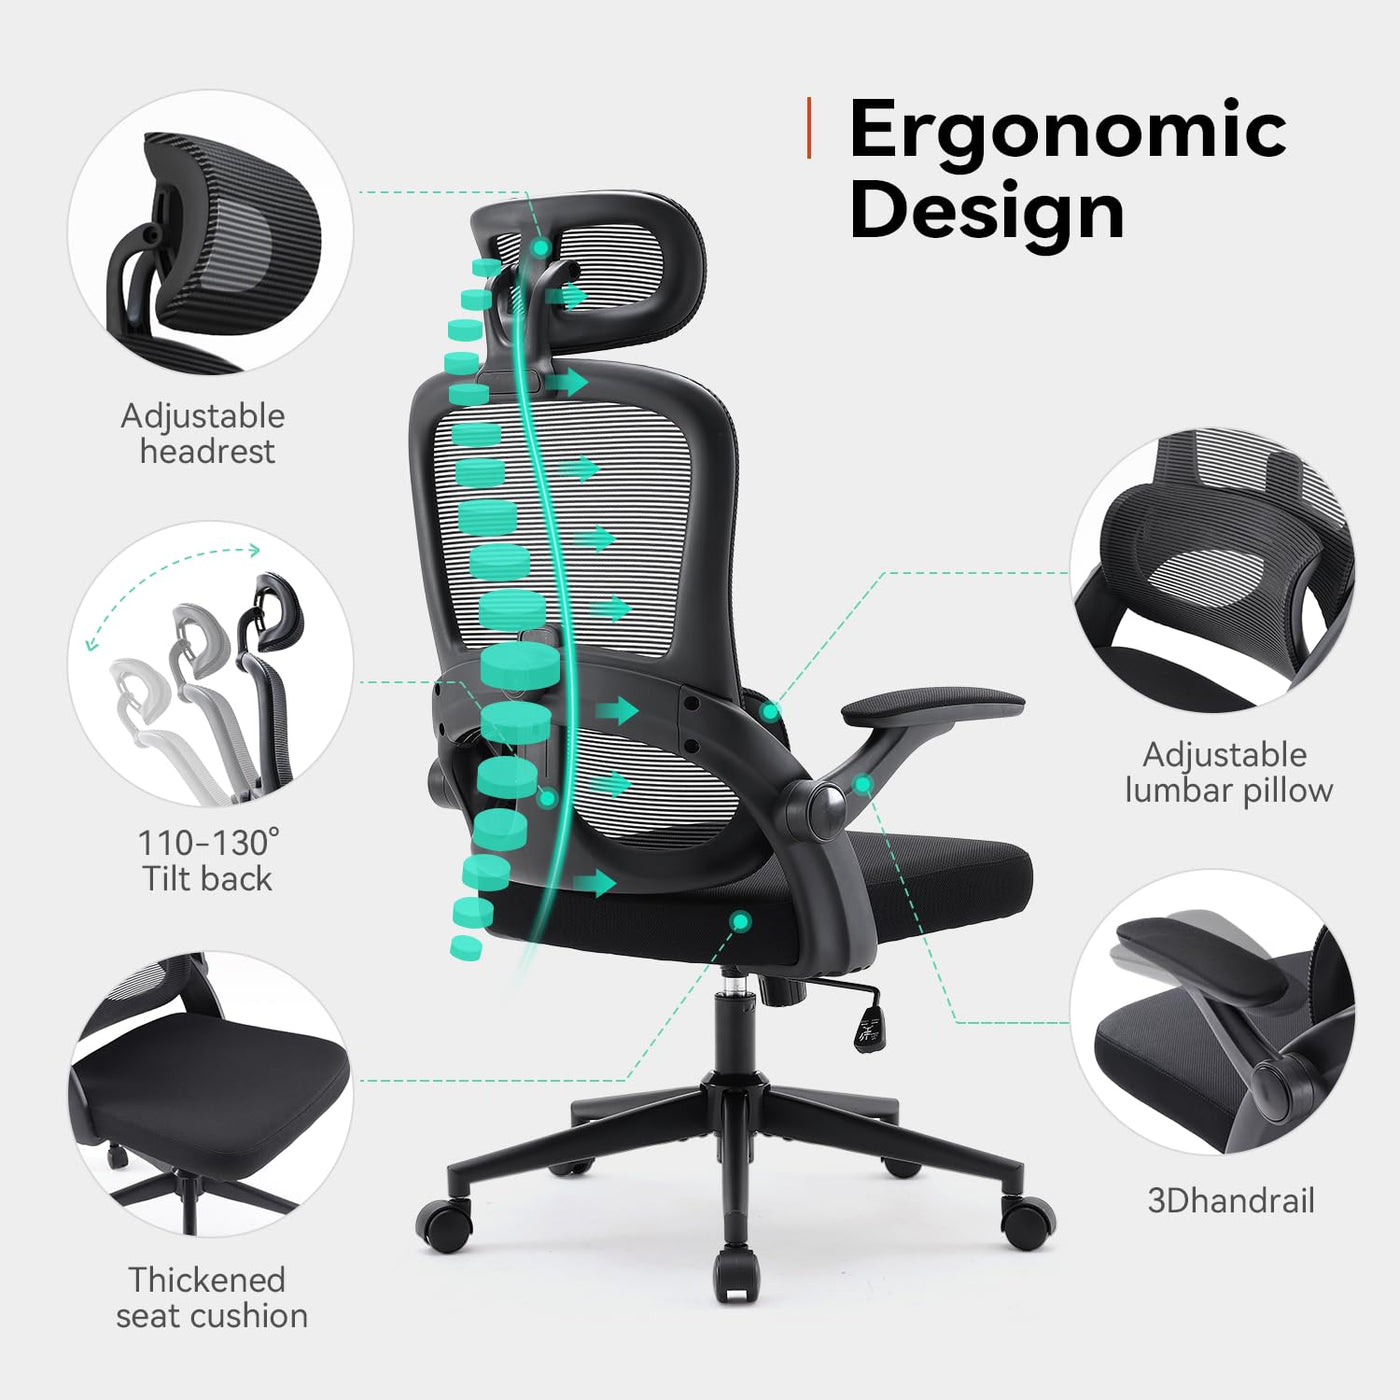 SIHOO M102C Ergonomic Office Chair, Big and Tall Office Chair with Flip-Up Armrests, Adjustable Headrest